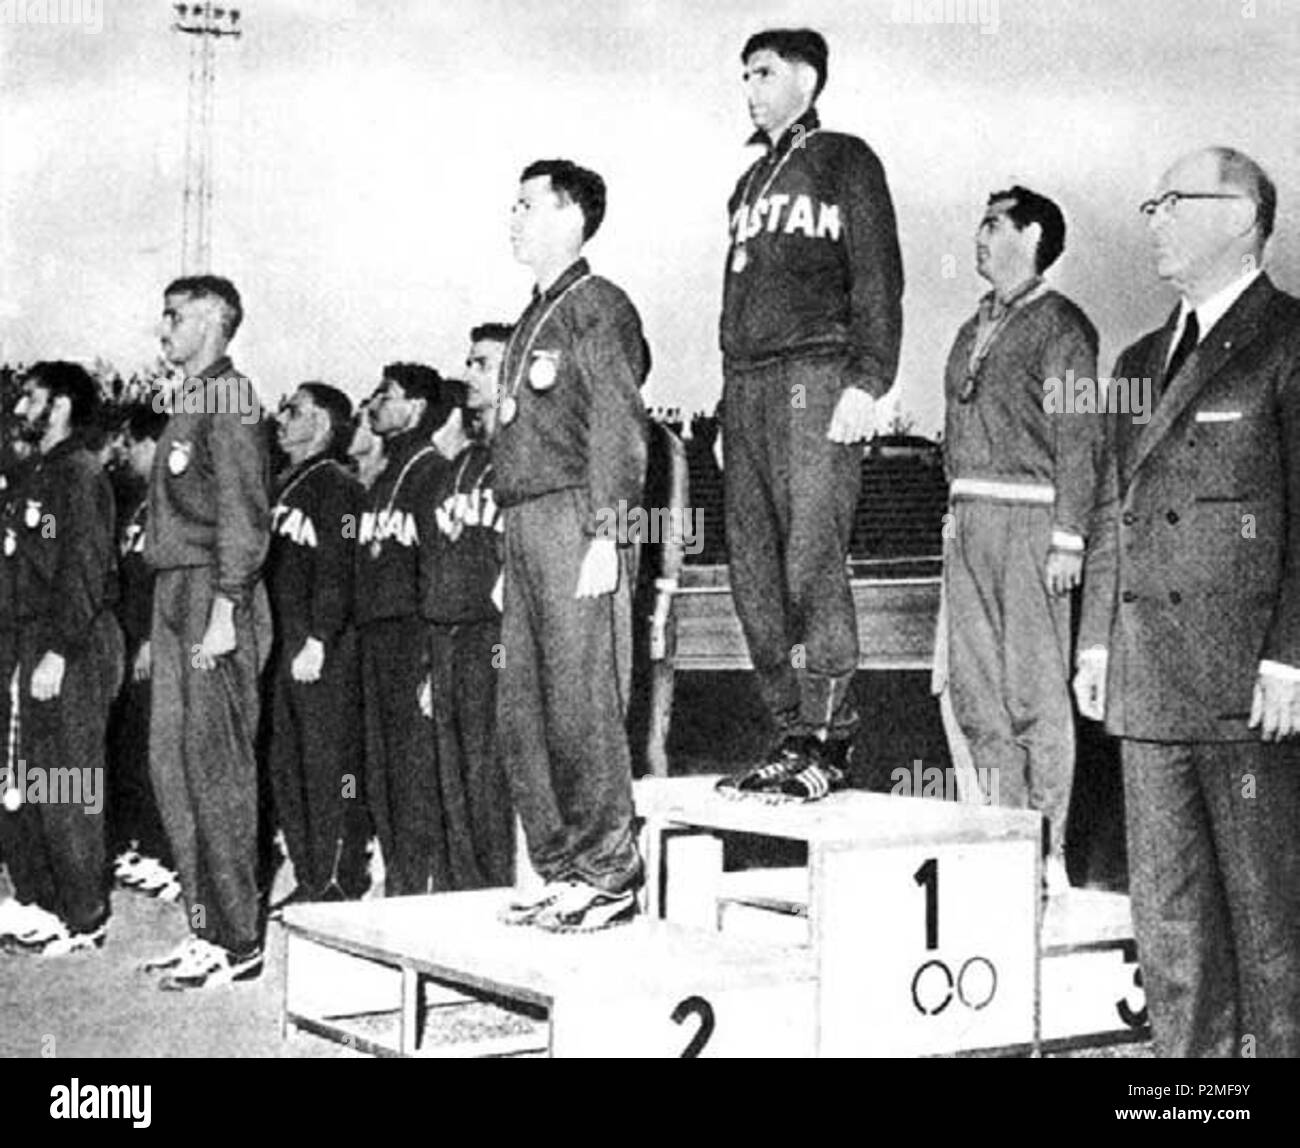 . Rome, Olympic Velodrome. The medal ceremony for the men's field hockey tournament at the 17th Olympic games in Rome; gold medalist were Pakistan national team; silver medalist India and bronze medalist were Spain. 9 September 1960. © Rome 1960 by the Organizing Committee of the Games of the XVII Olympiad 39 Hockey su prato Olimpiadi 1960 premiazione Stock Photo